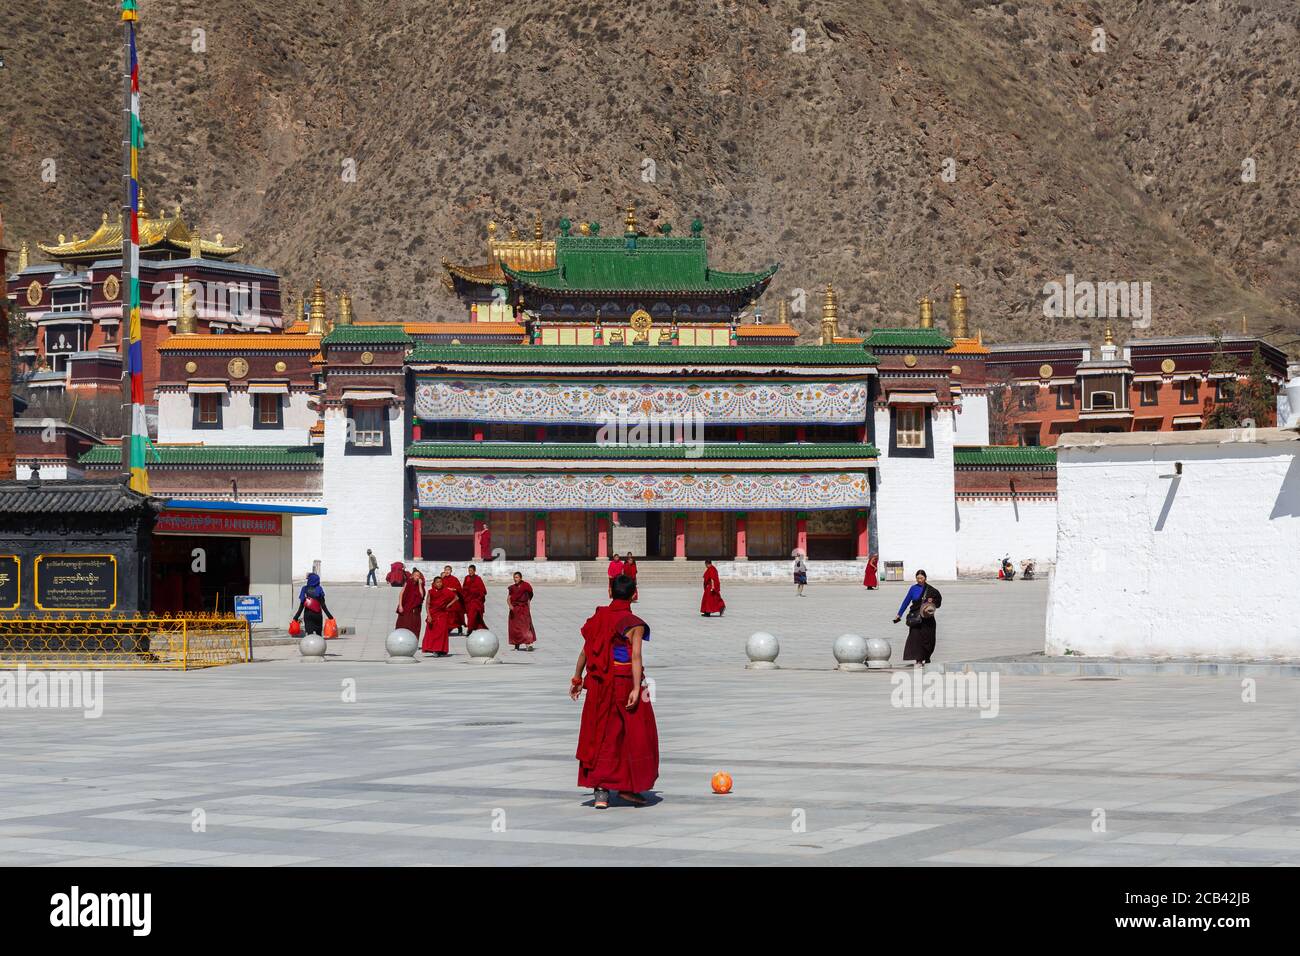 View at a square at Labrang Monastery. With red robed monks. Temple buildings with golden and green roof. Stock Photo